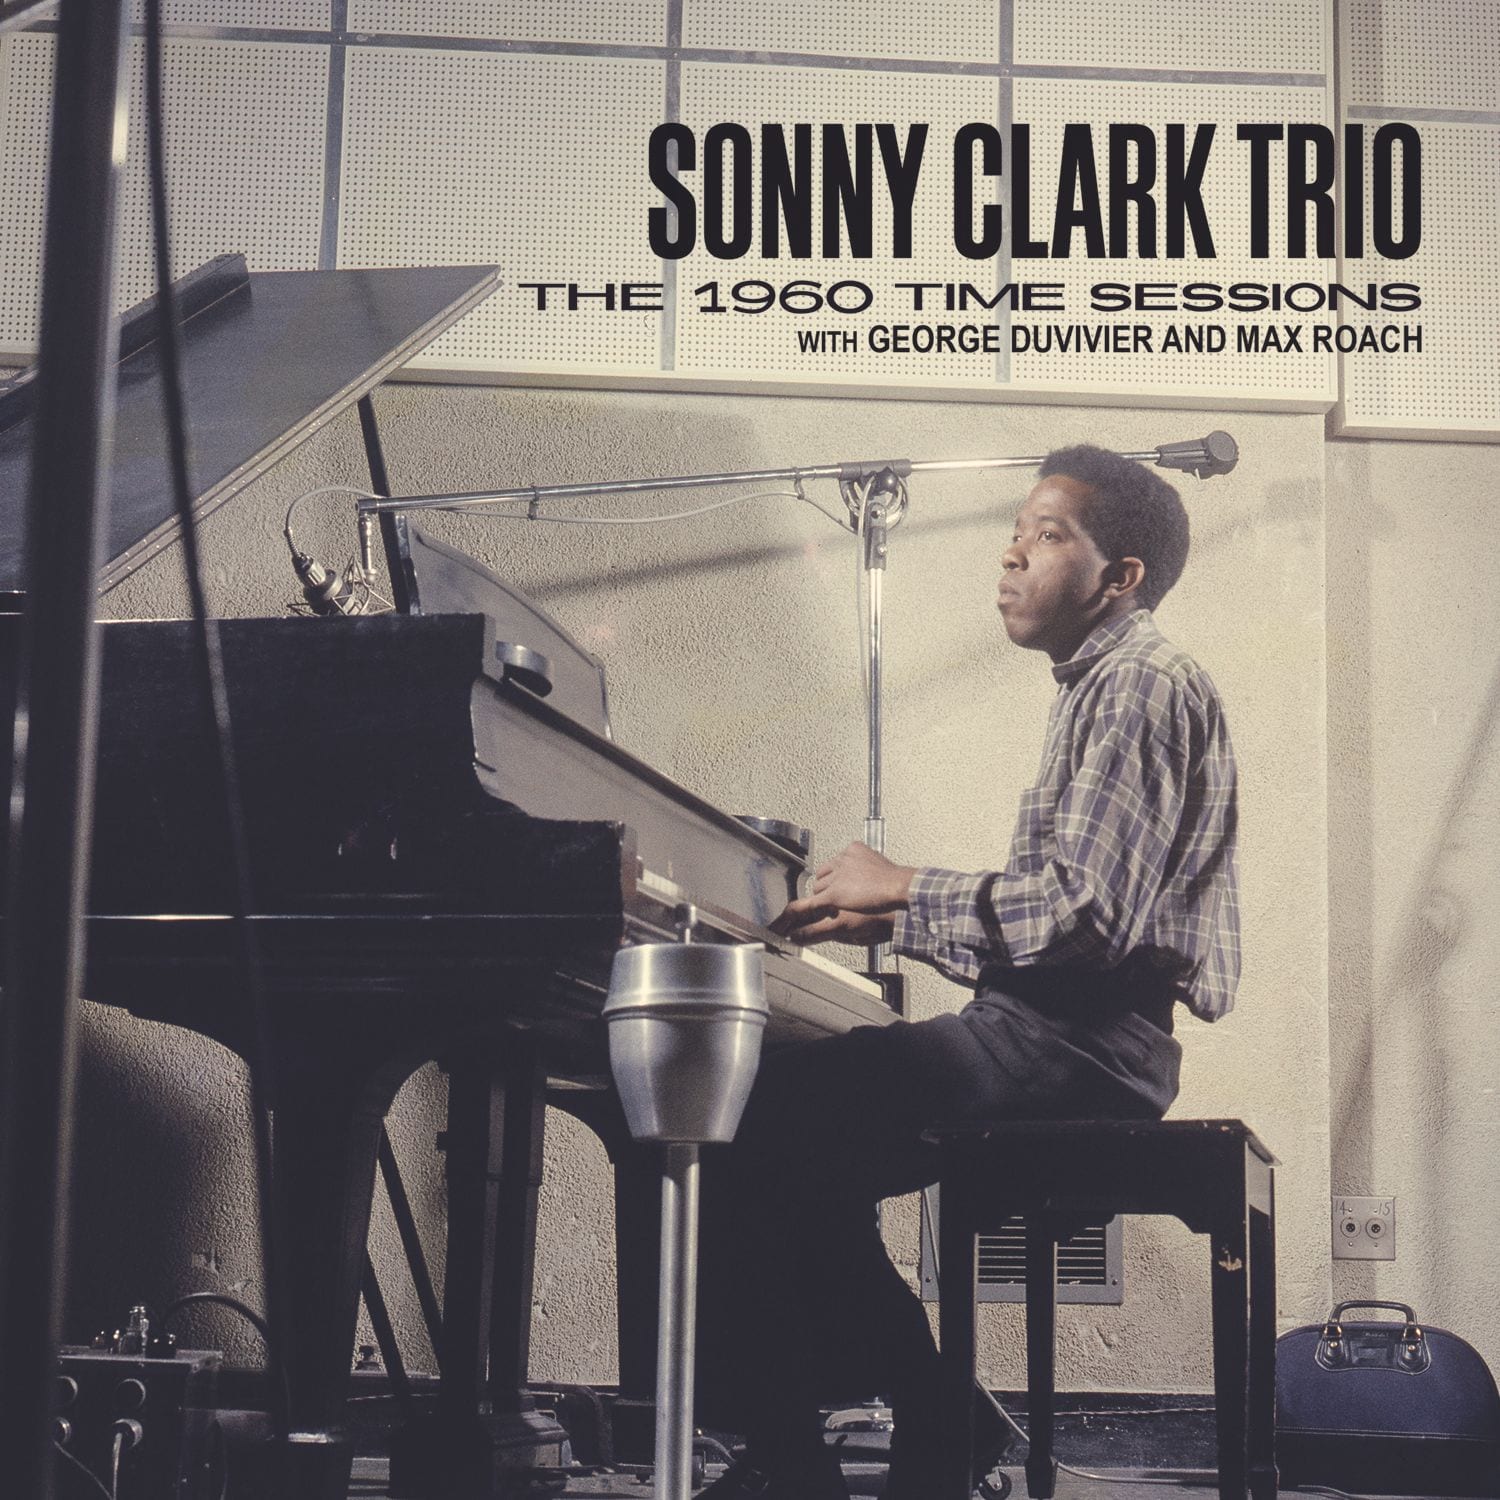 The Sonny Clark Trio: The 1960 Time Sessions